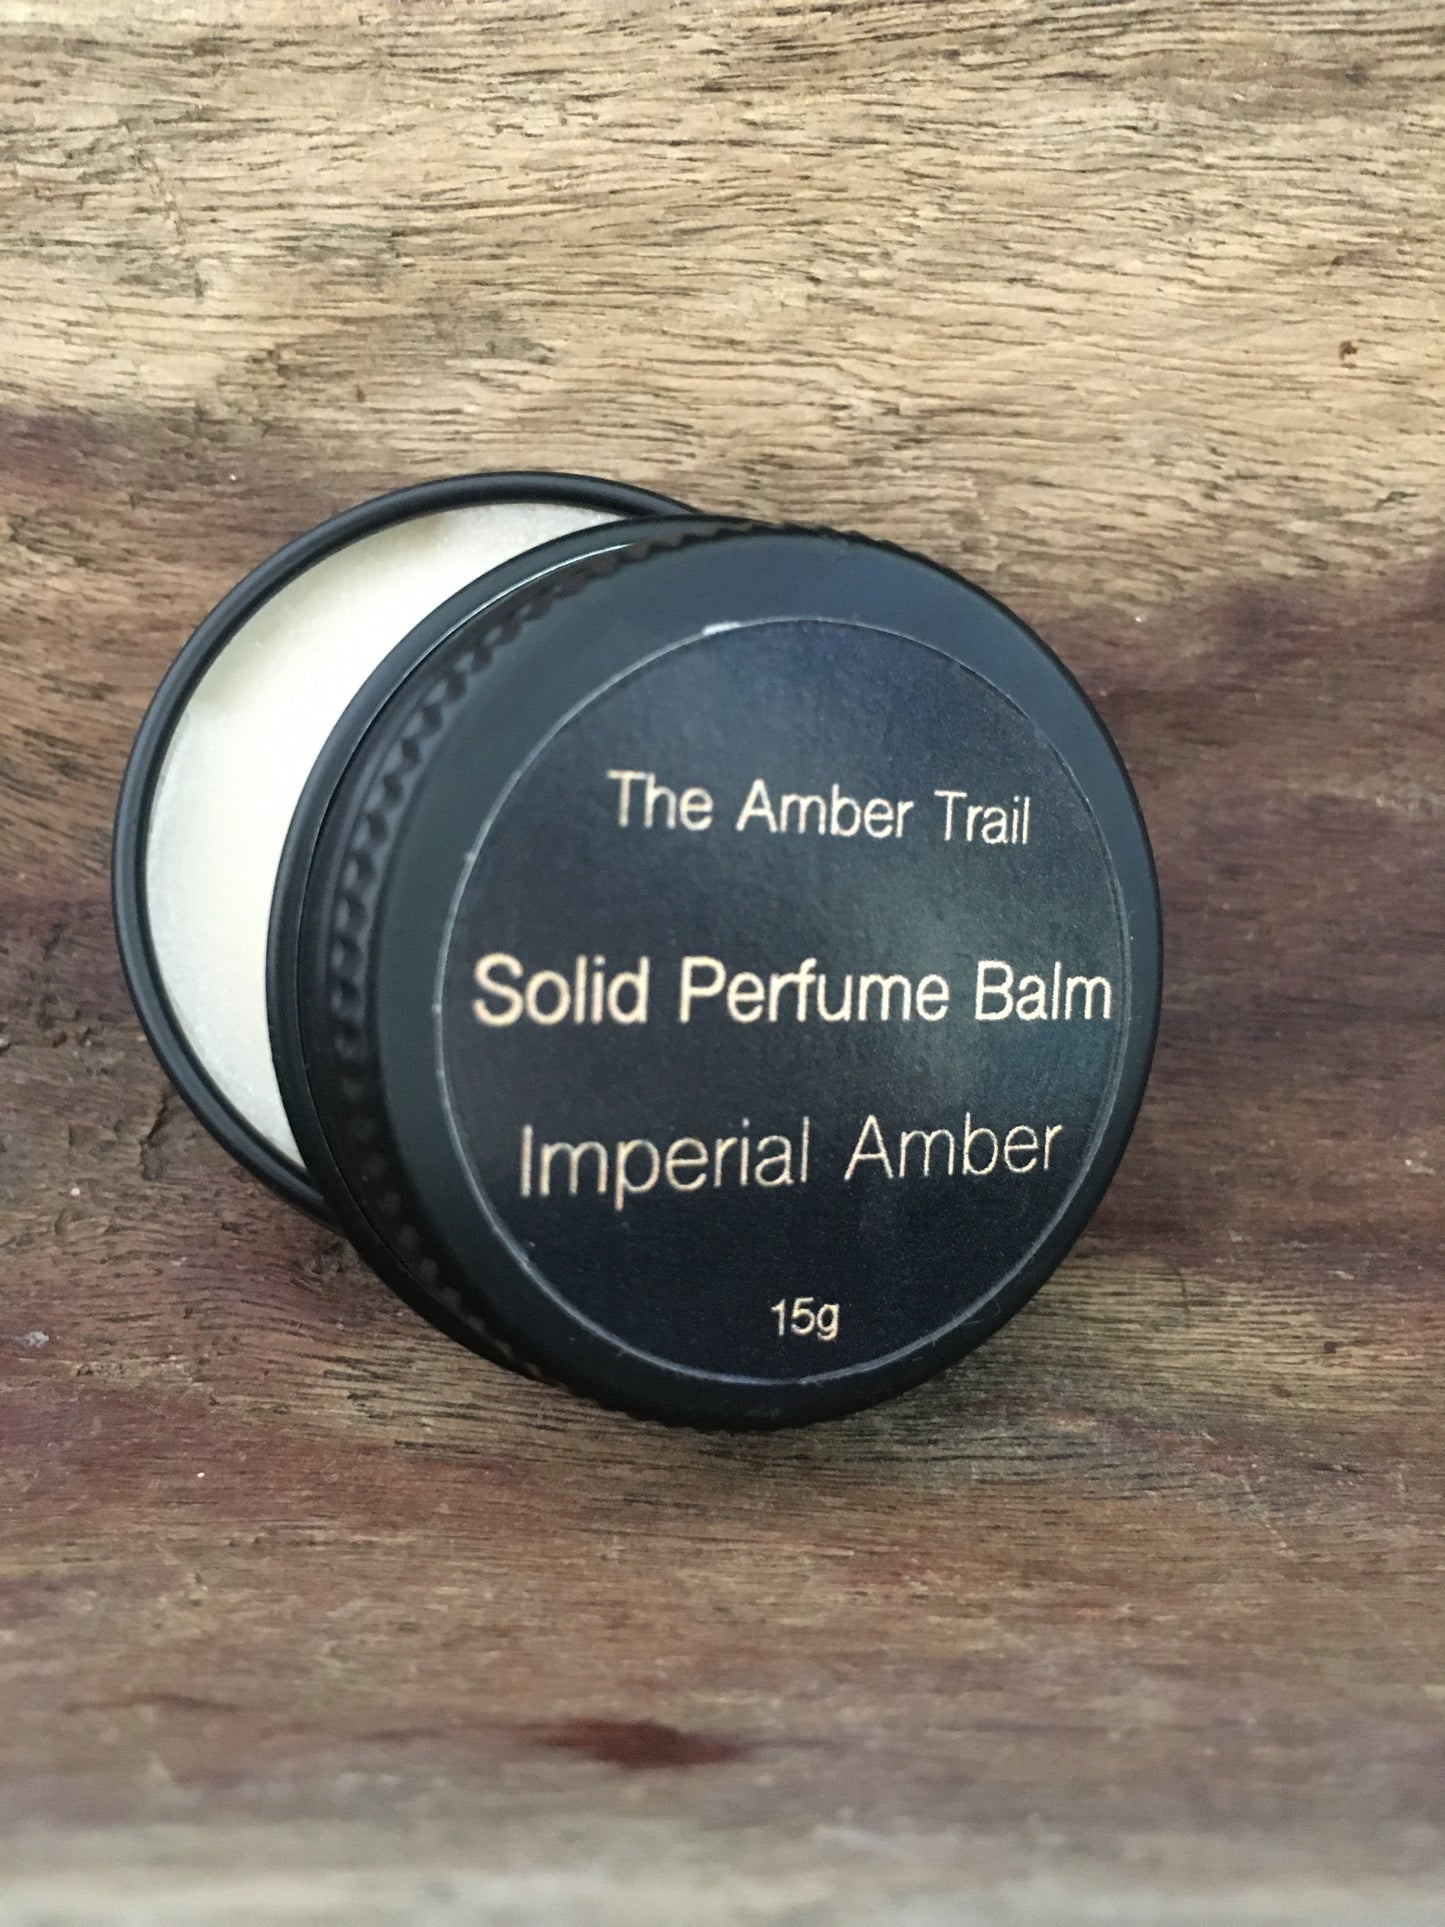 French Perfume Balms - Imperial Amber - The Amber Trail